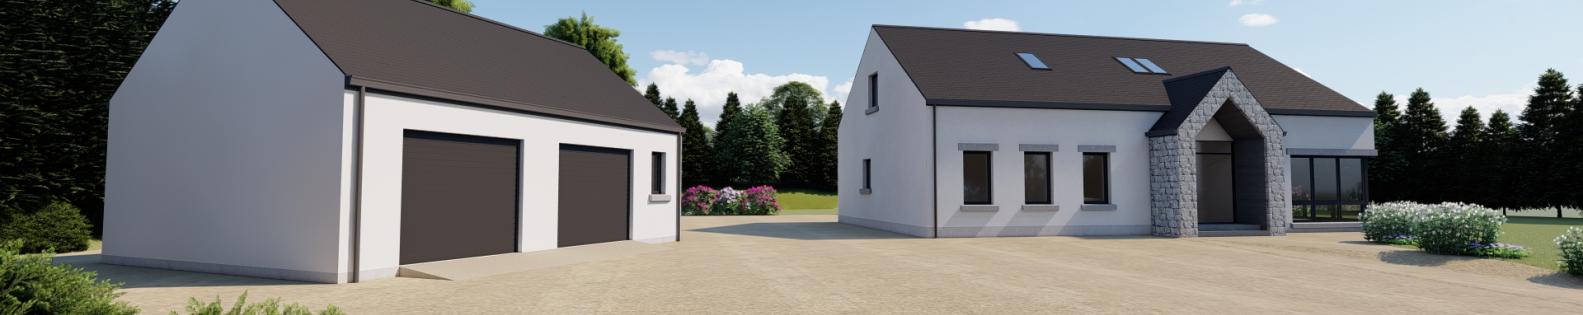 New build projects Northern Ireland 